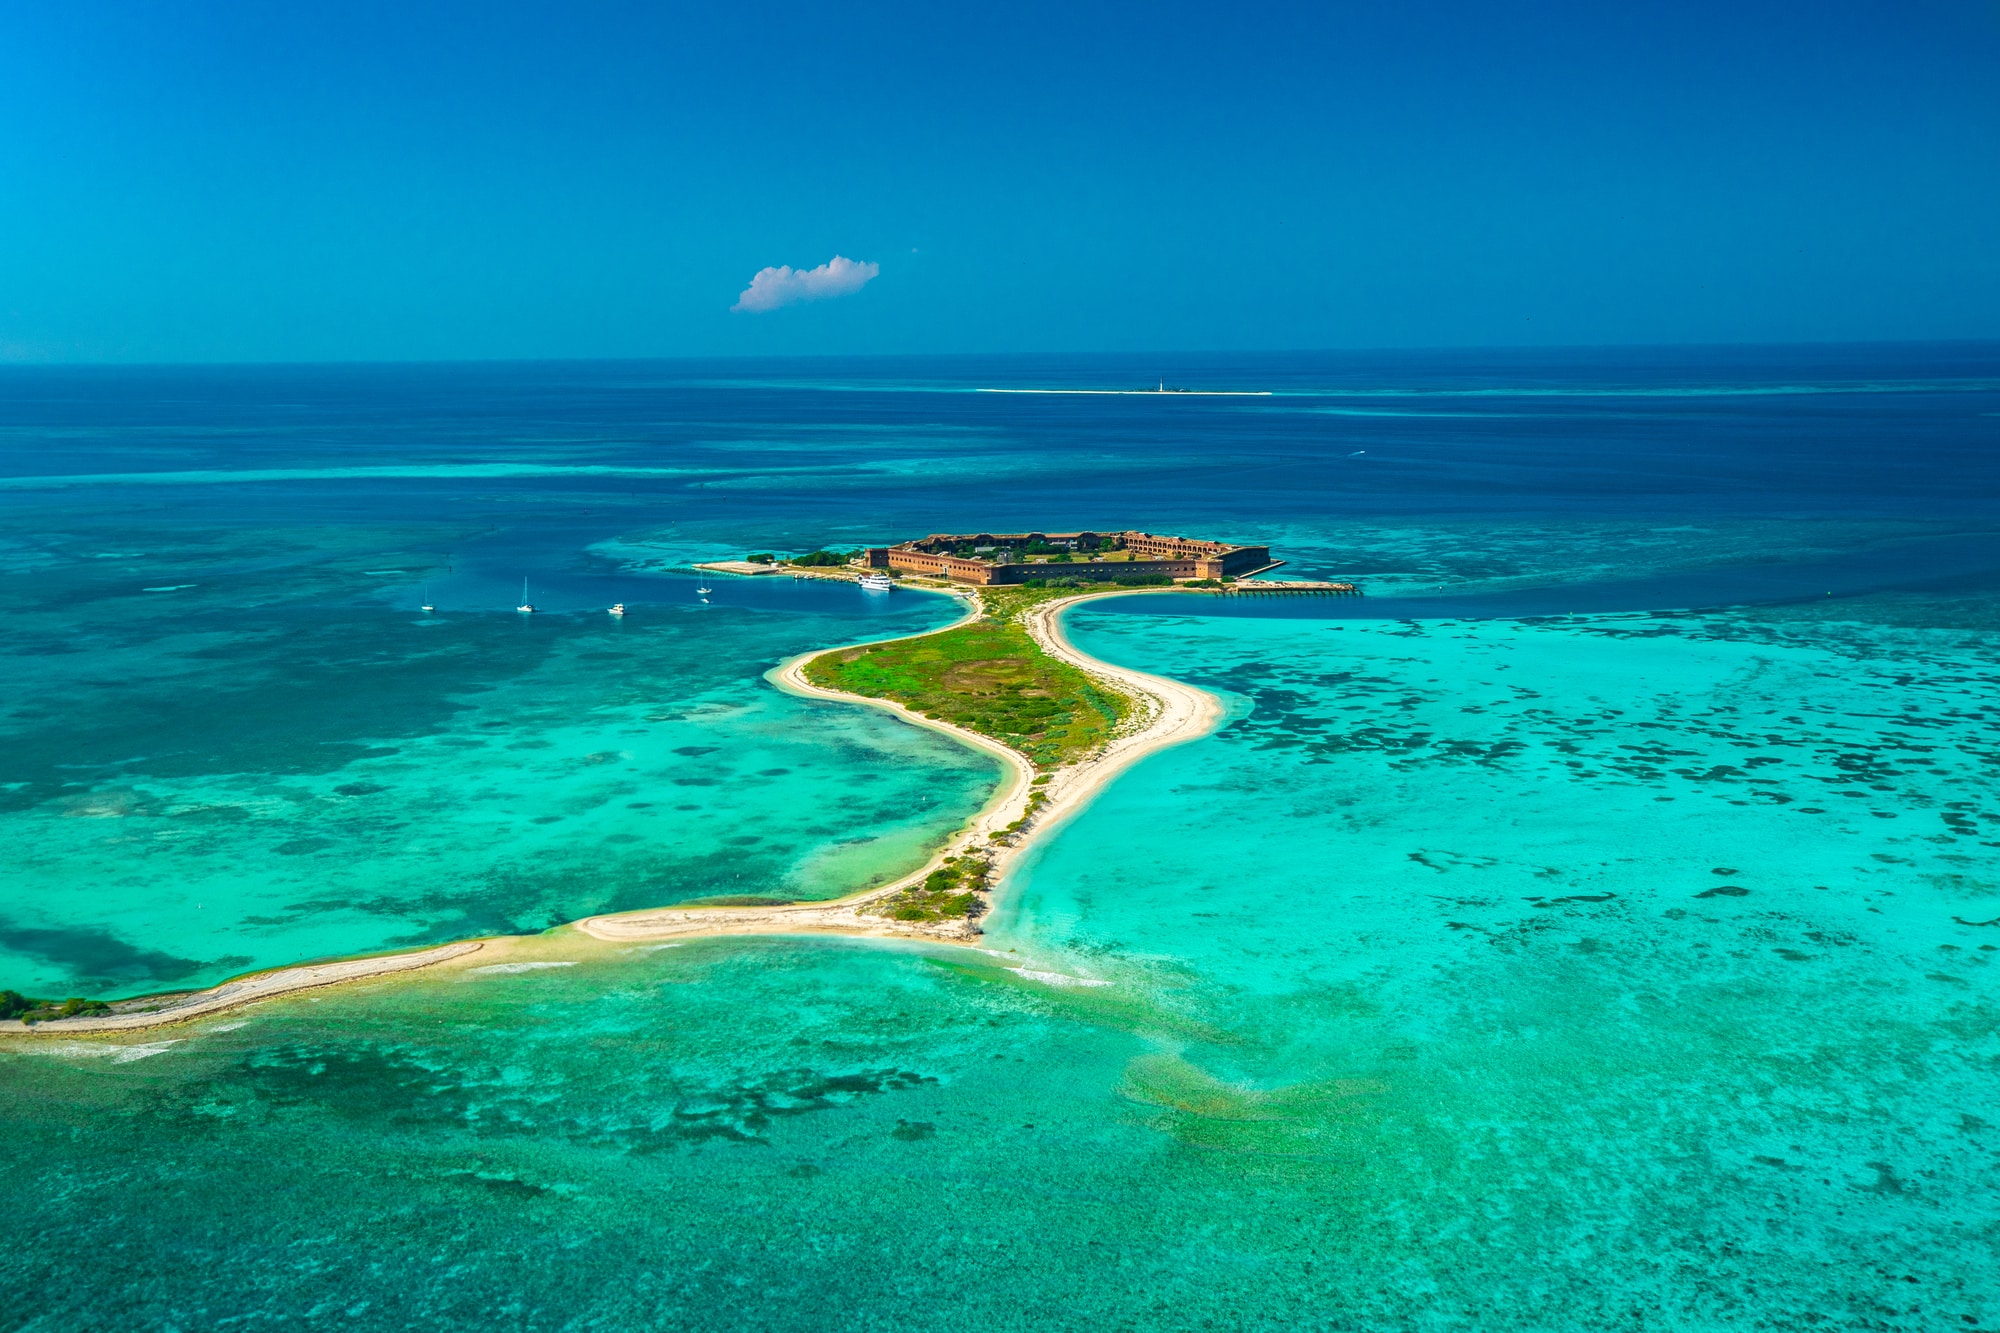 Visiting Key West - Dry Tortugas National Park